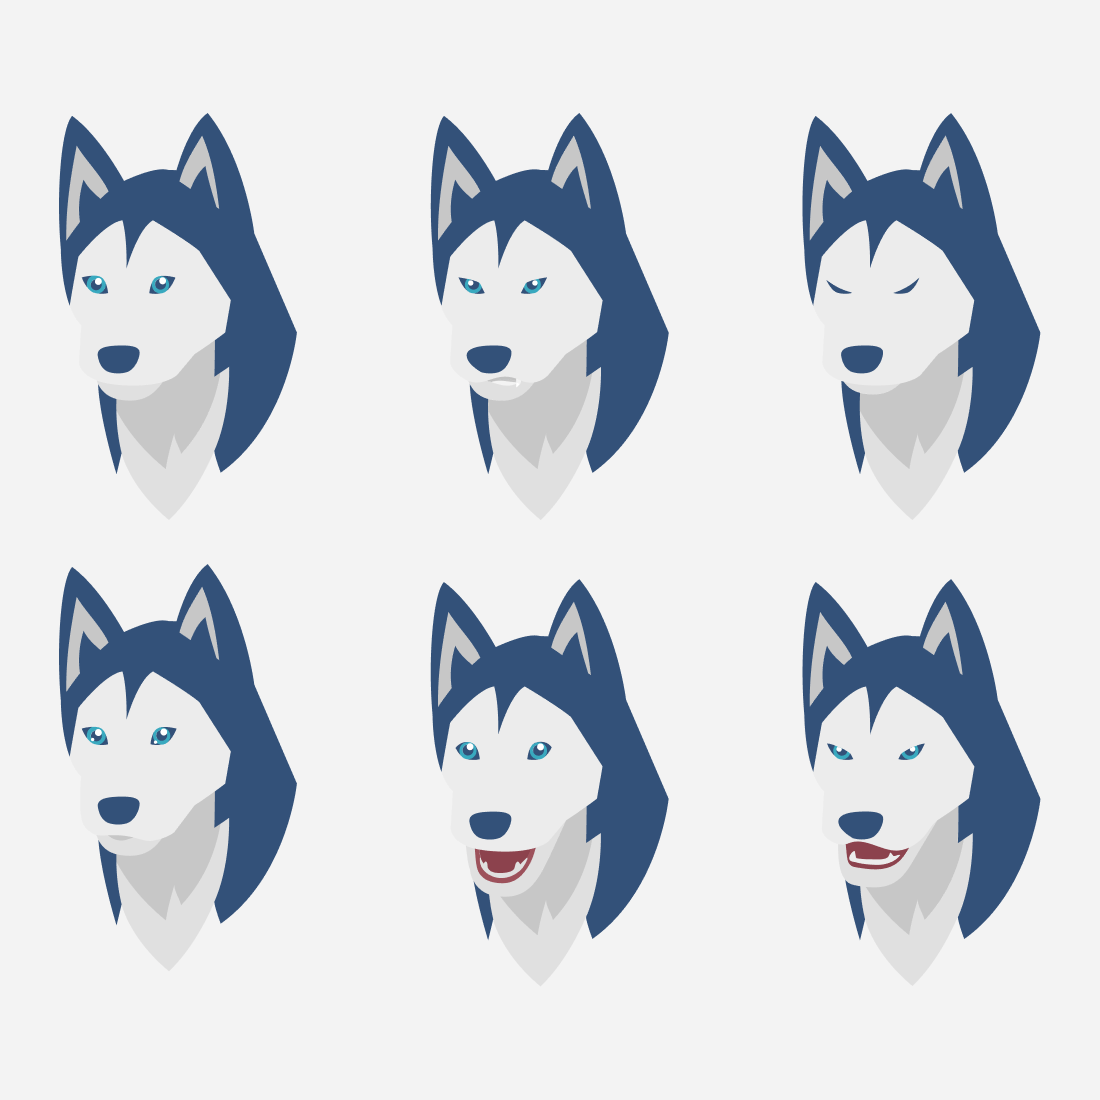 Huskies in different emotional state.